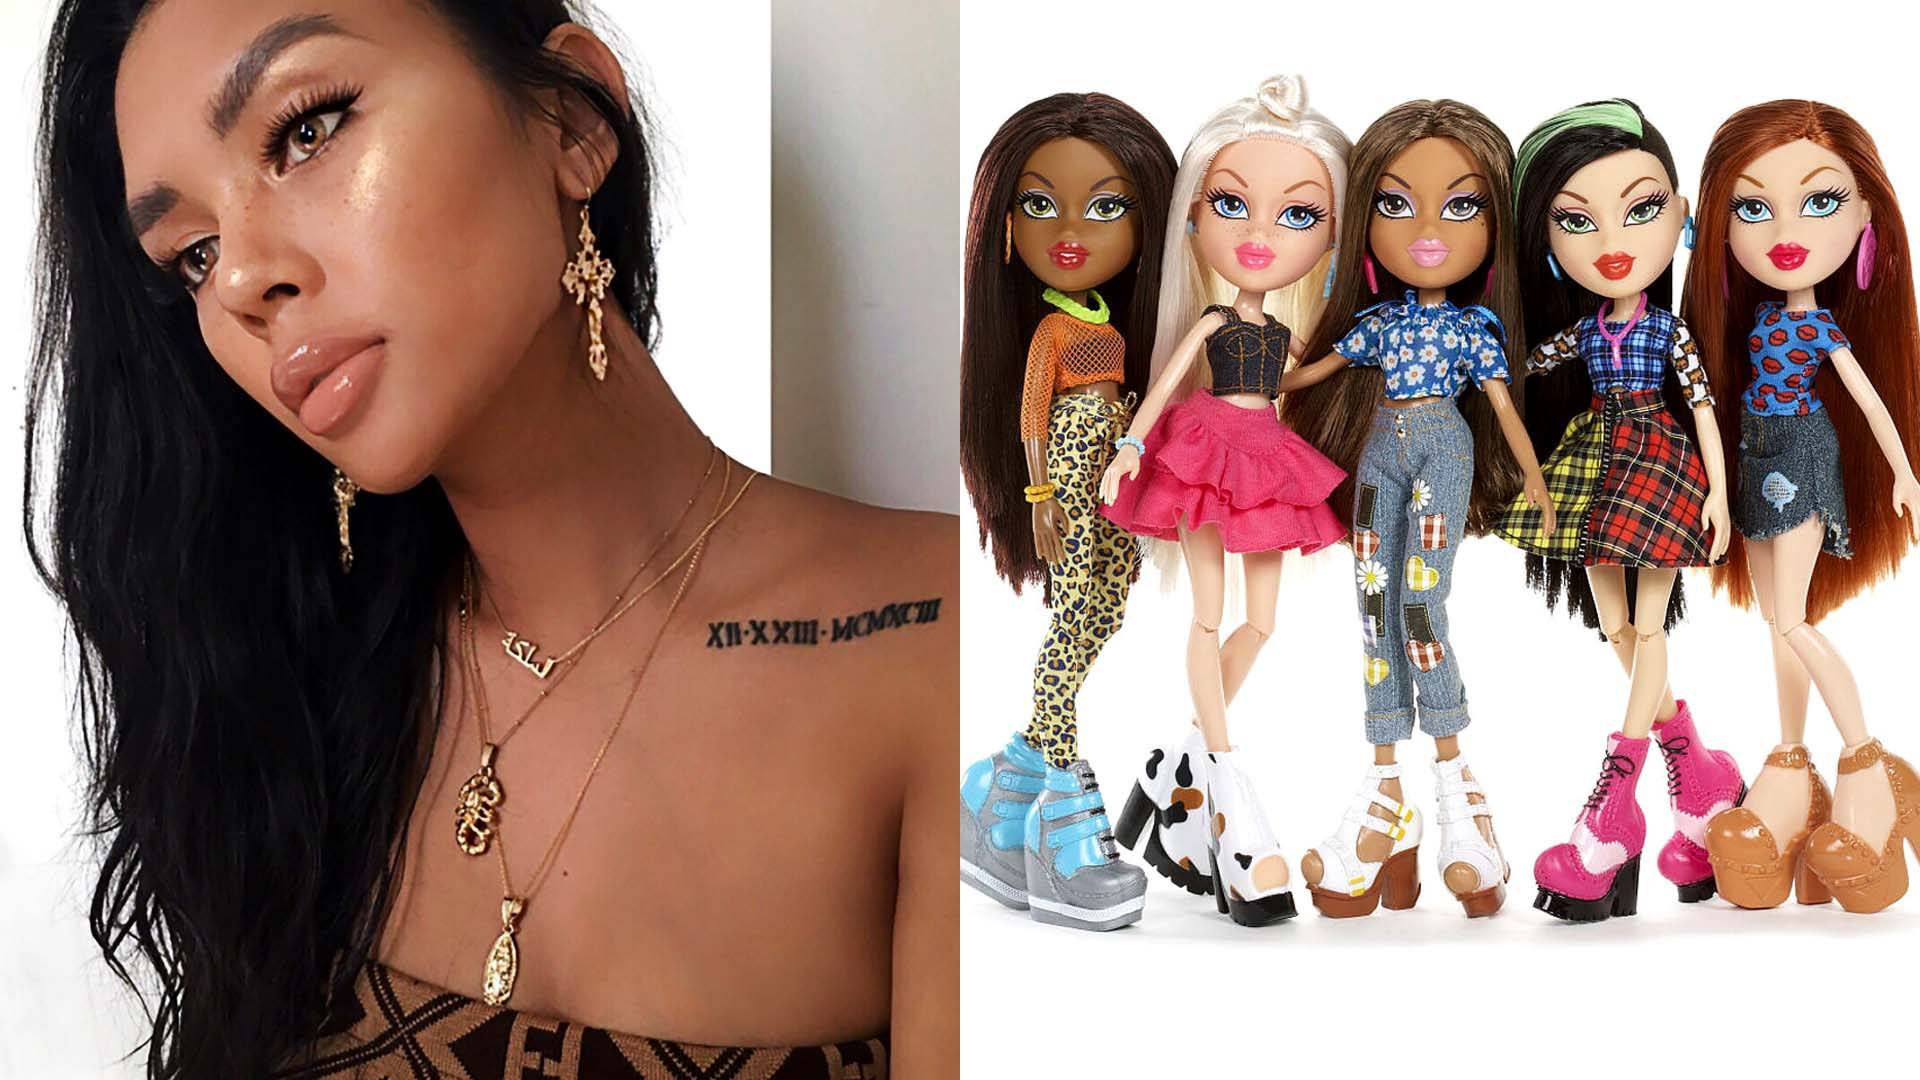 See The Newest Makeup That Is Transforming Individuals Into Bratz Dolls' | News |